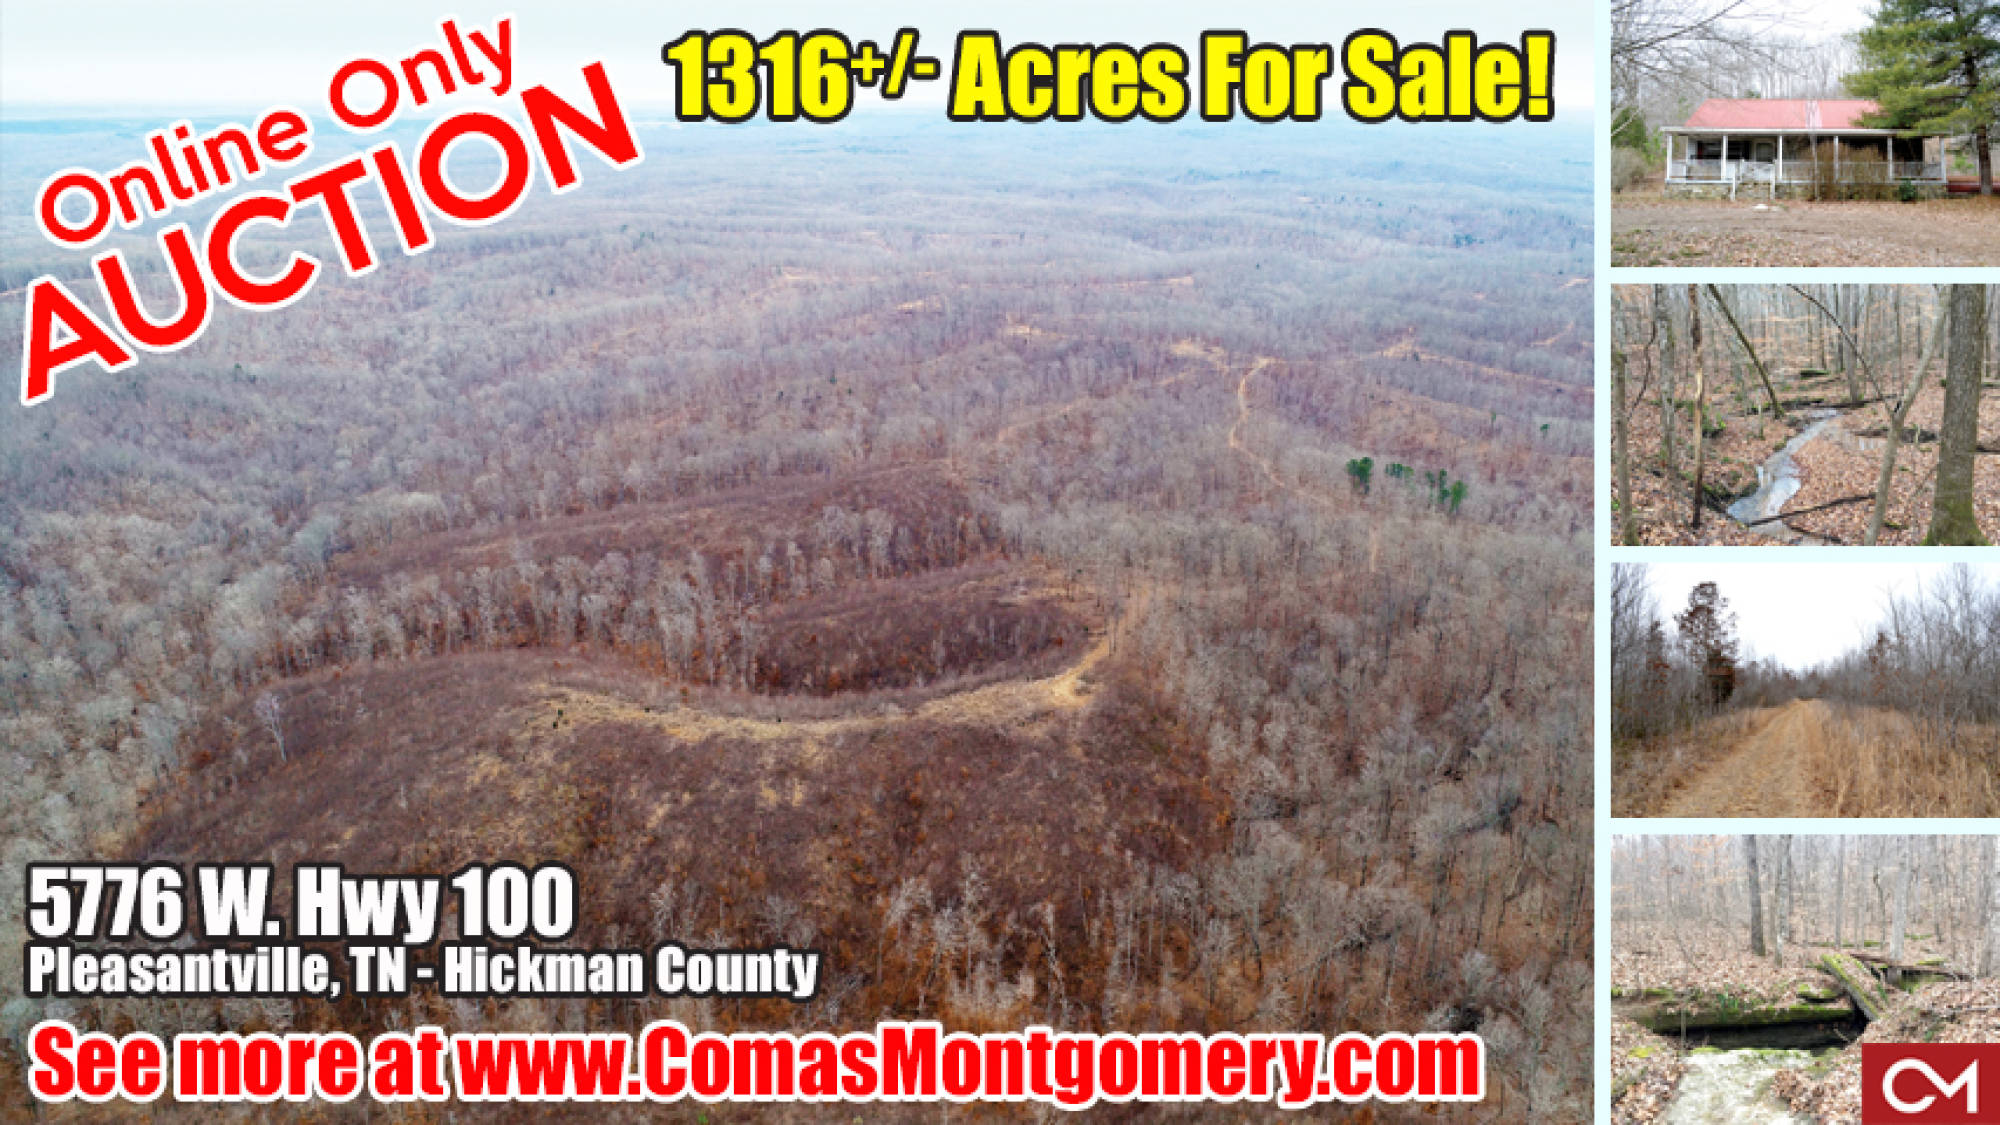 1318, Acres, For Sale, Land, Hunting, Horse, Equestrian, Farm, Recreation, Cabin, Hunt, Investment, Hickman, County, Pleasantville, Tennessee, Comas, Montgomery